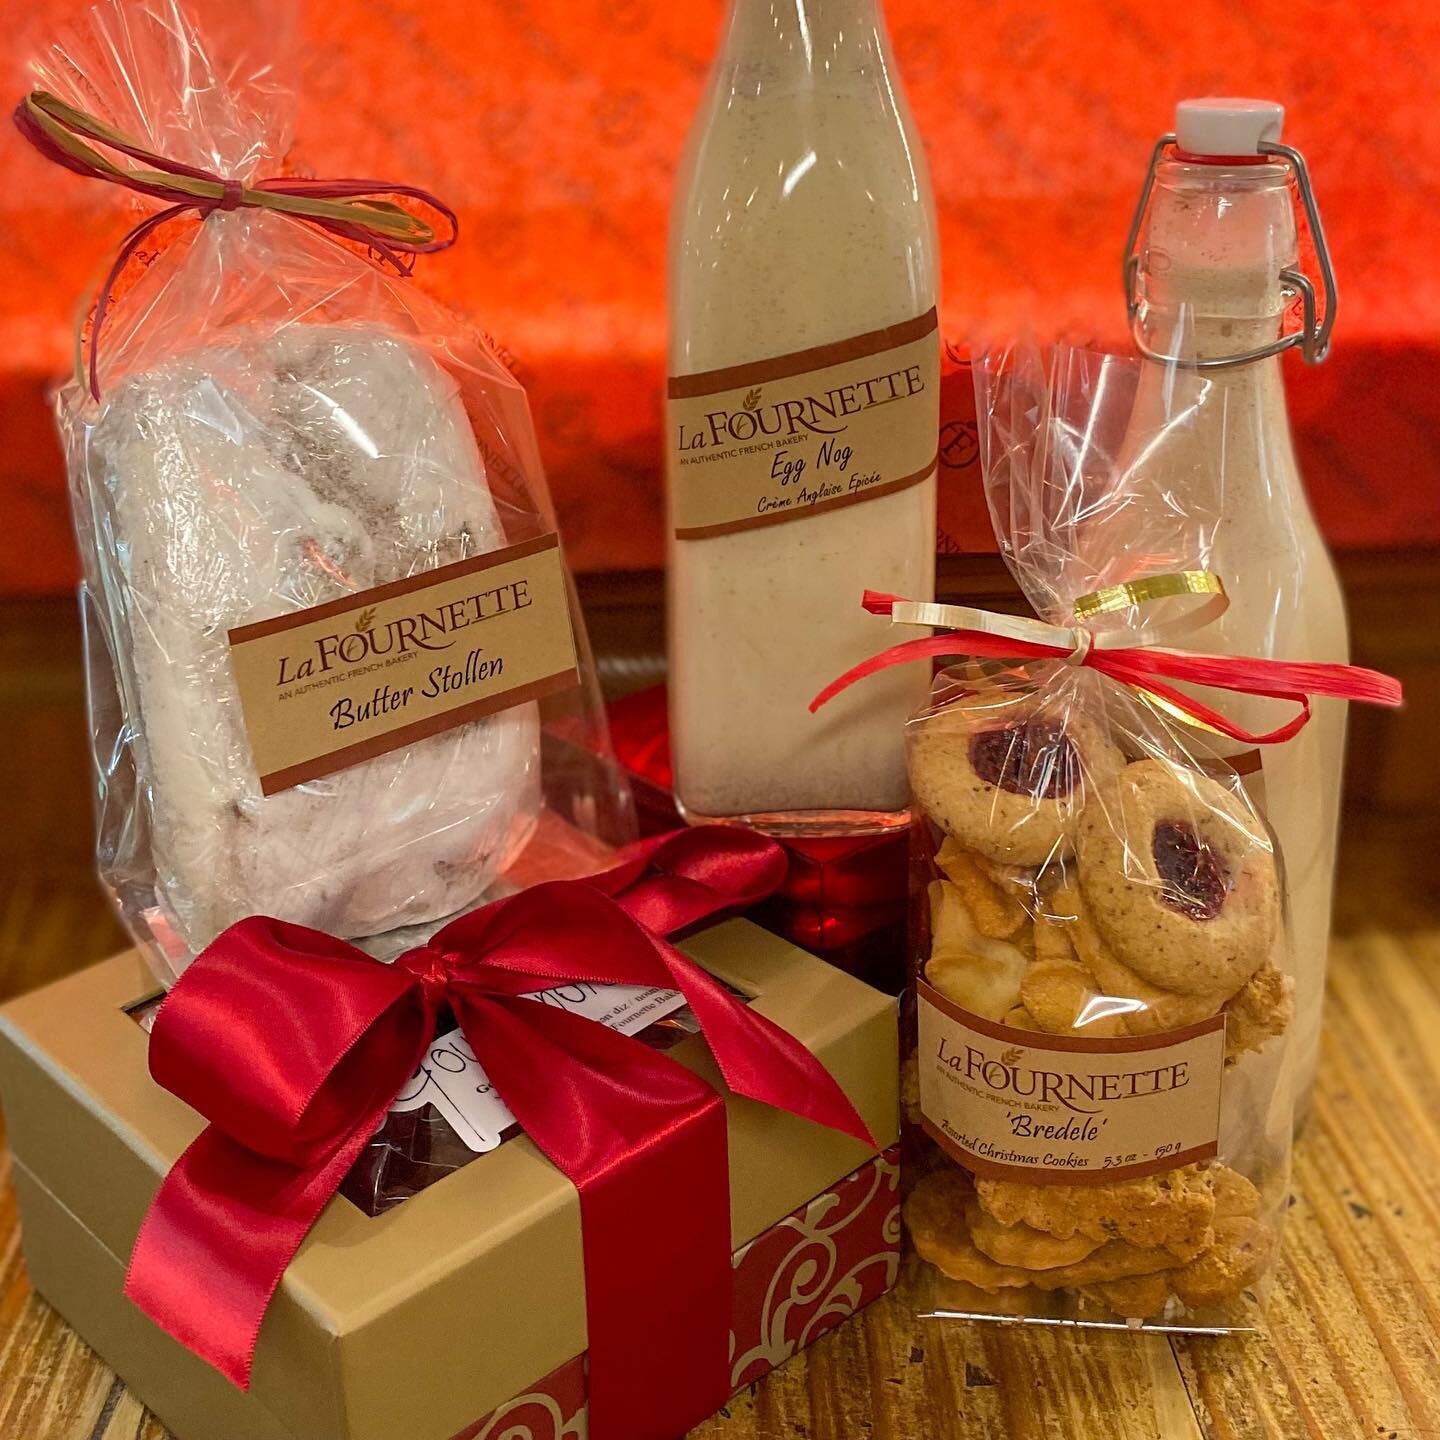 Holiday specialties are here! Egg nog, stollen, and Christmas cookies are available starting today. B&ucirc;ches de No&euml;l (Yule logs) will be available starting December 11th.